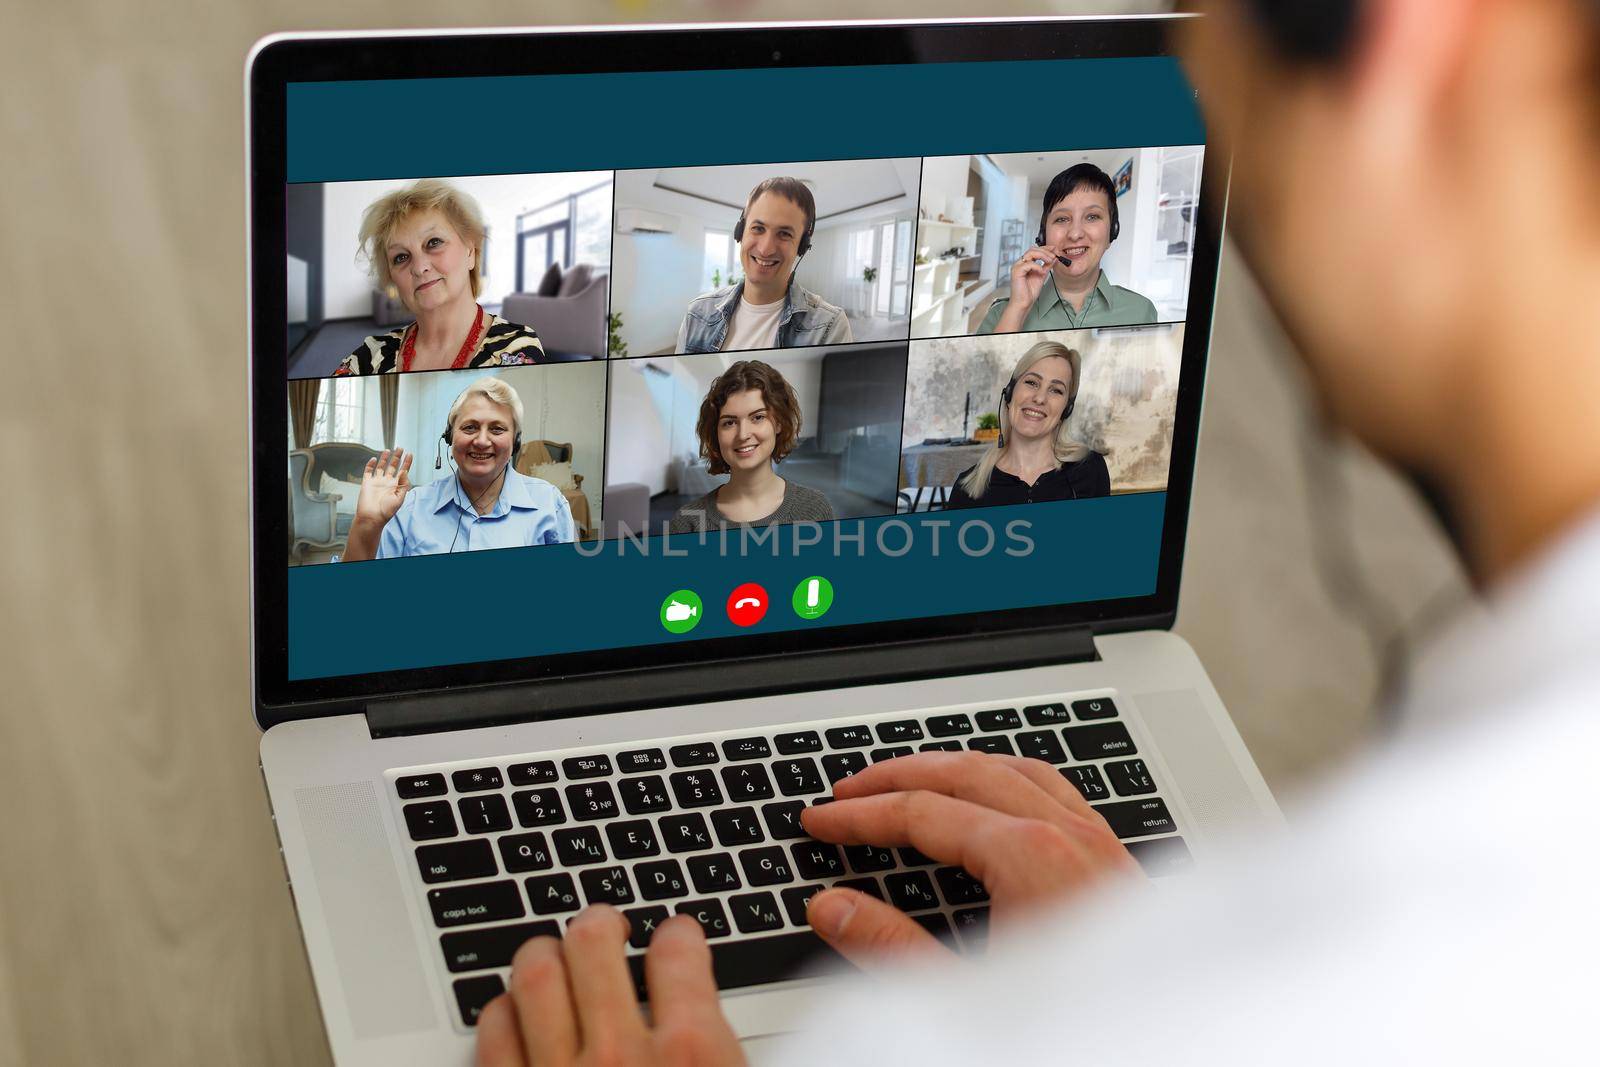 Group Friends Video Chat Connection Concept.